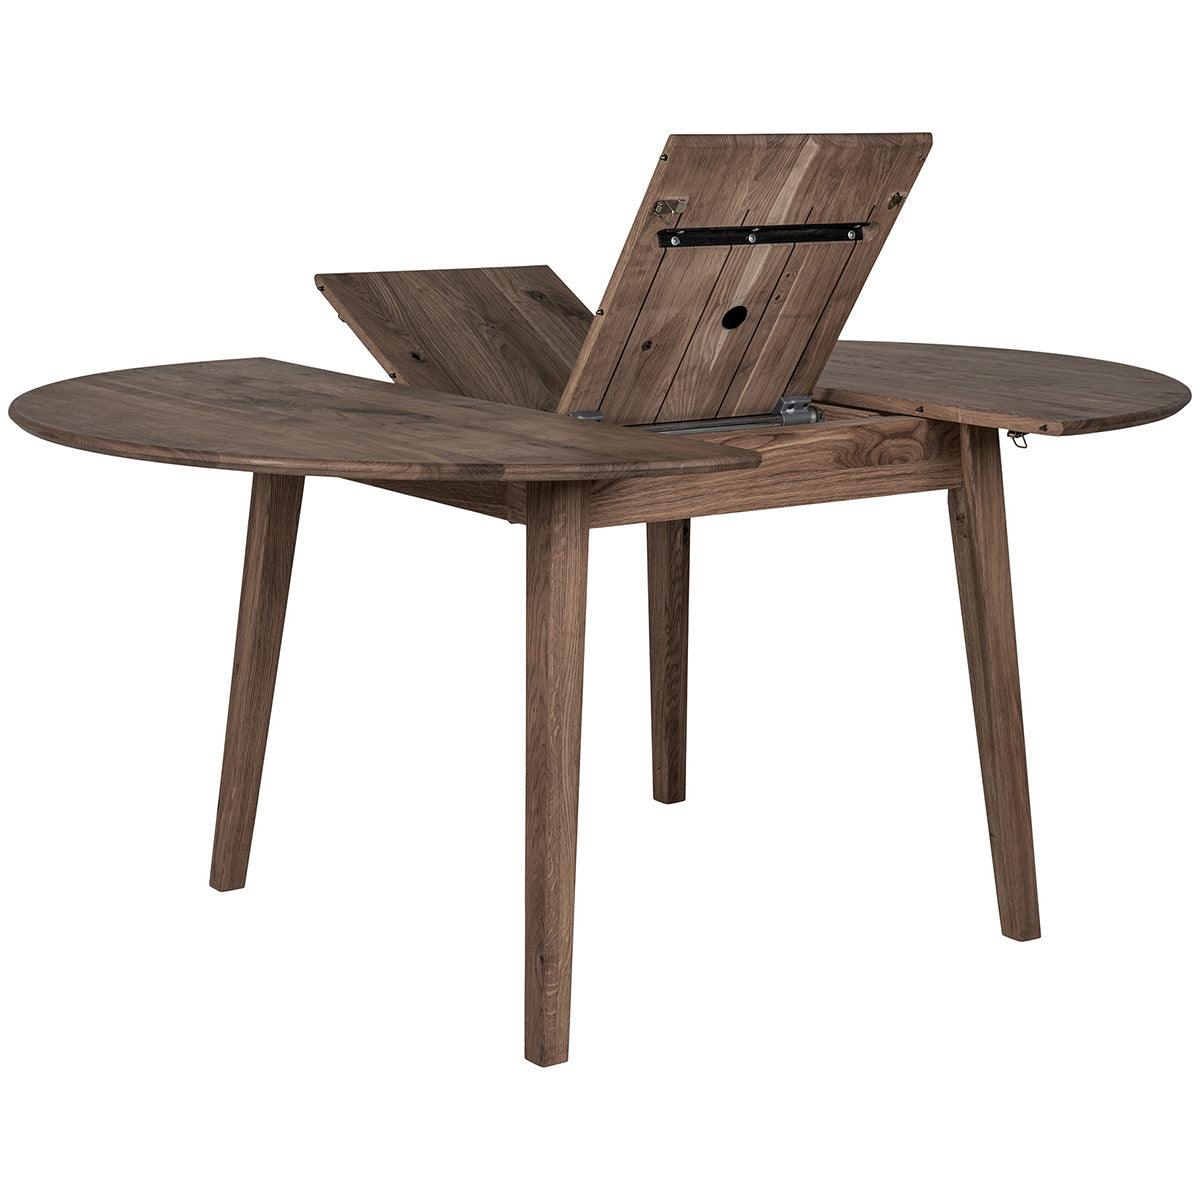 Metz Oiled Oak Extendable Dining Table - WOO .Design